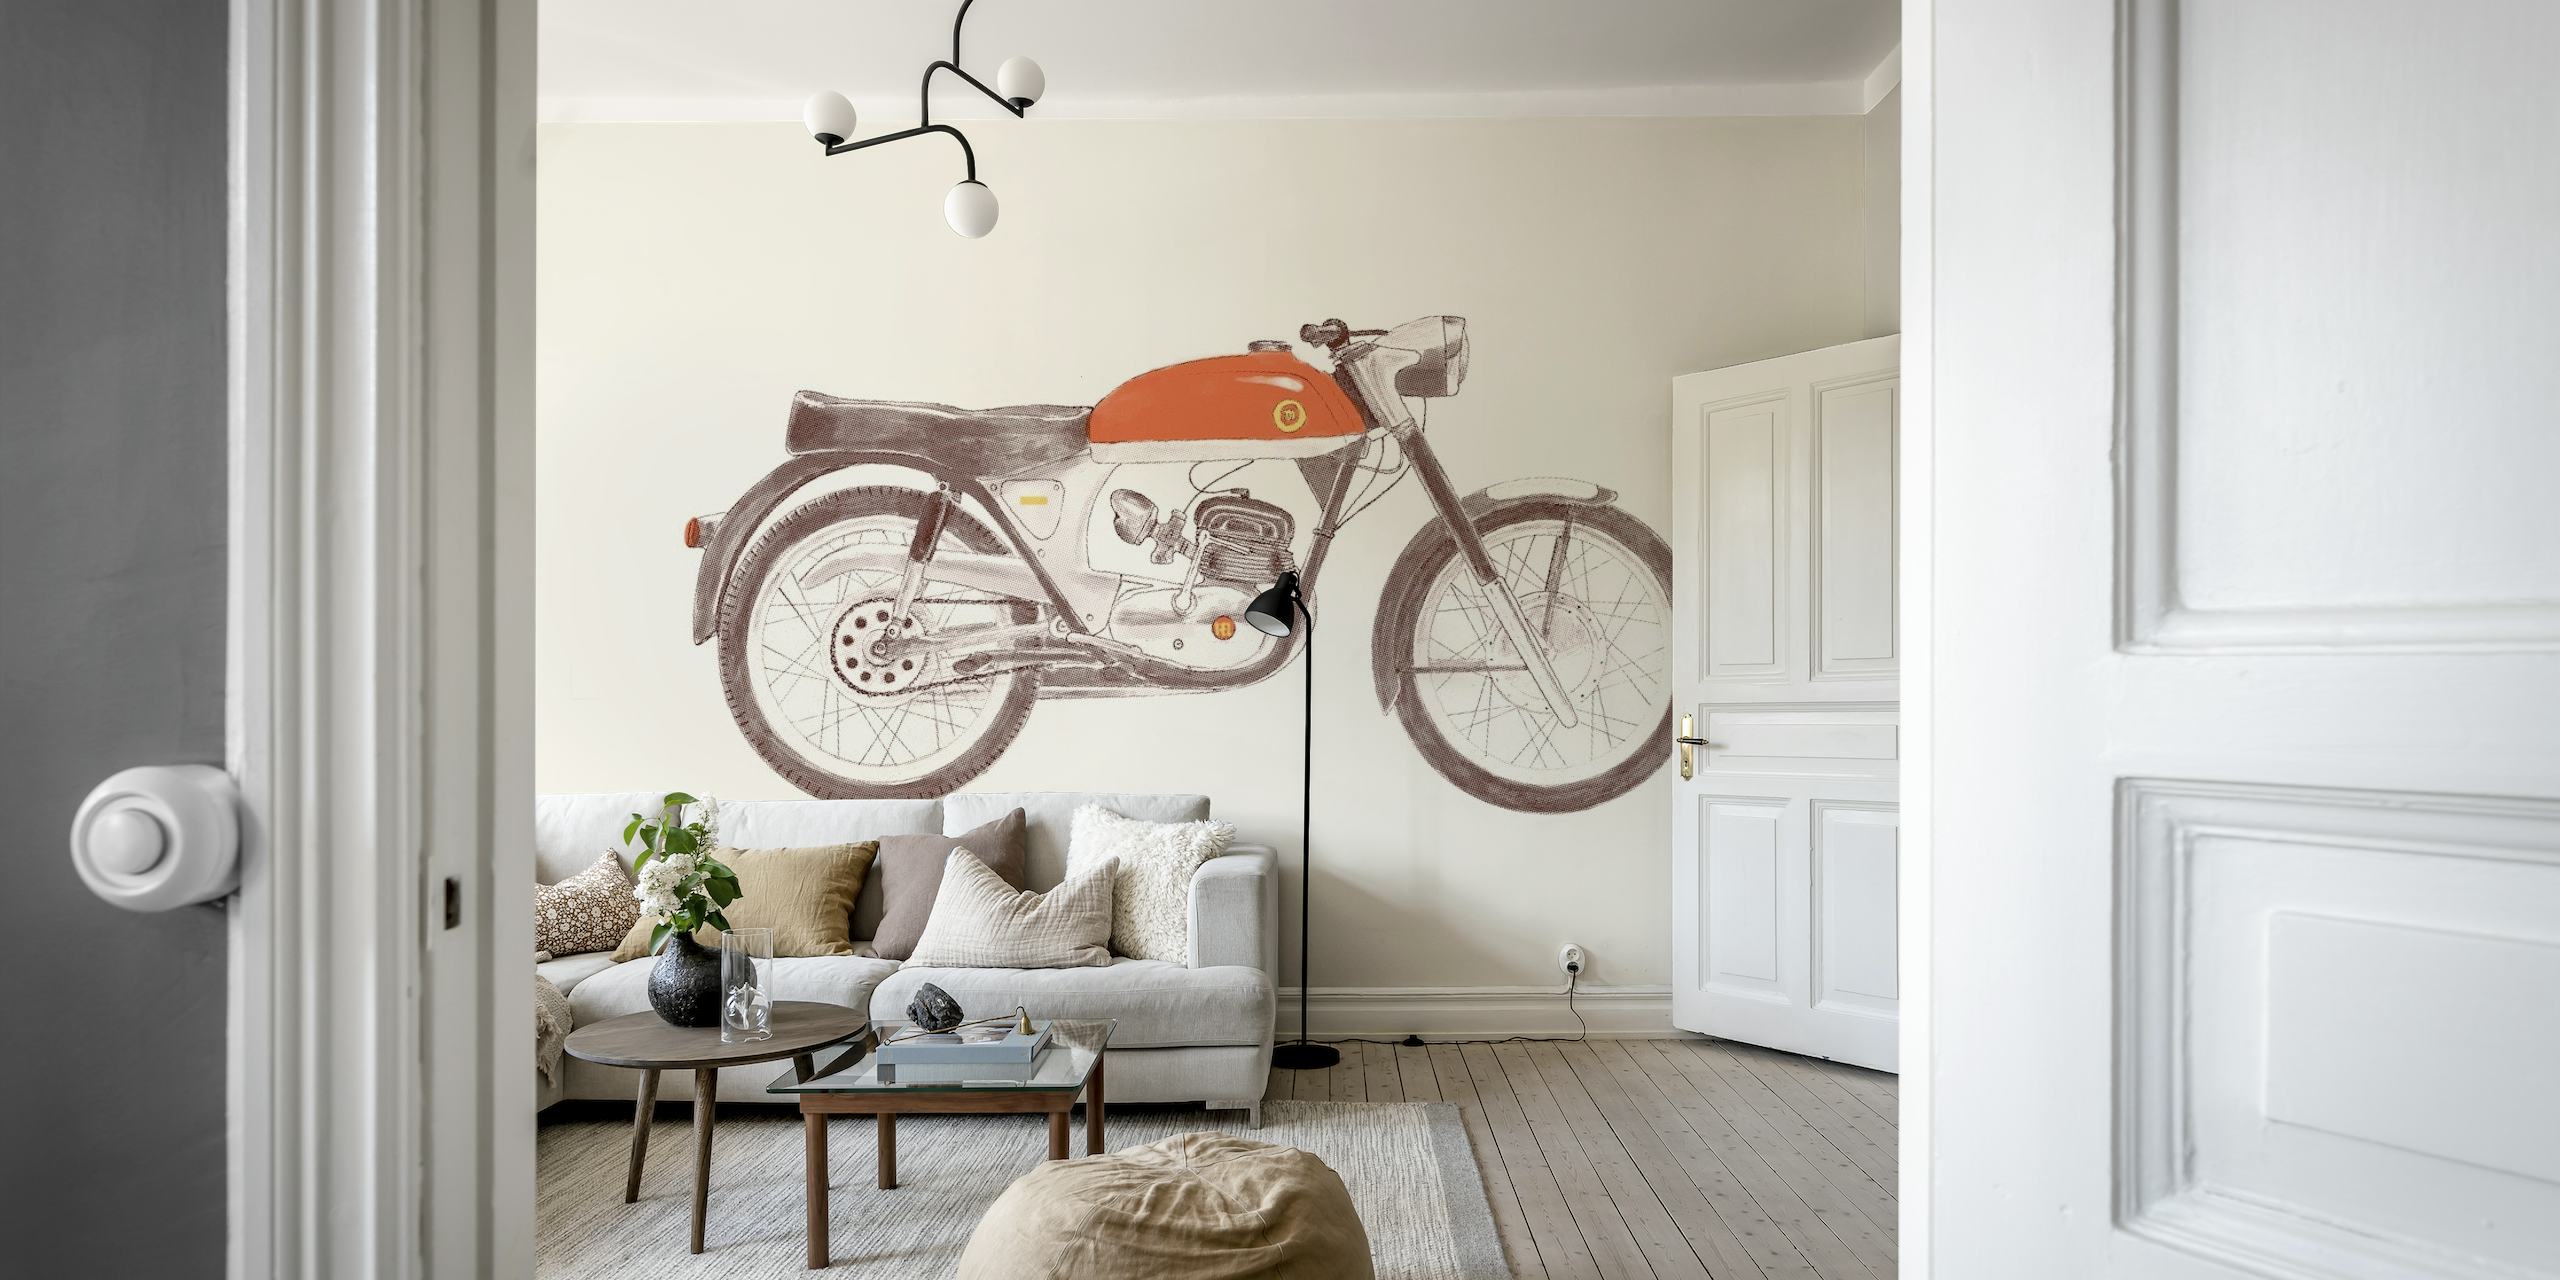 Vintage motorcycle wall mural in an artistic sketch style